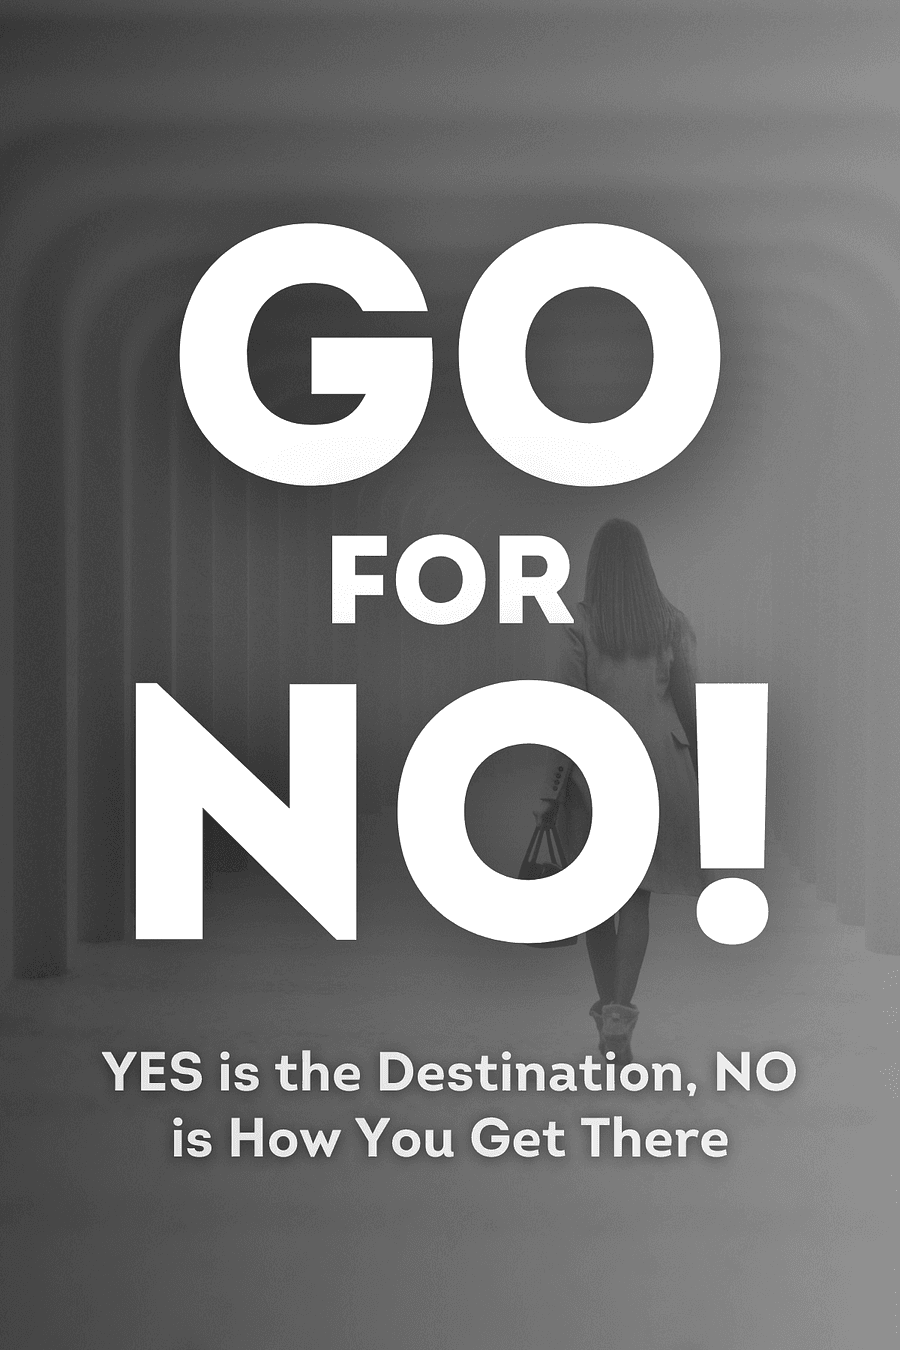 Go for No! Yes is the Destination, No is How You Get There by Richard Fenton, Andrea Waltz - Book Summary